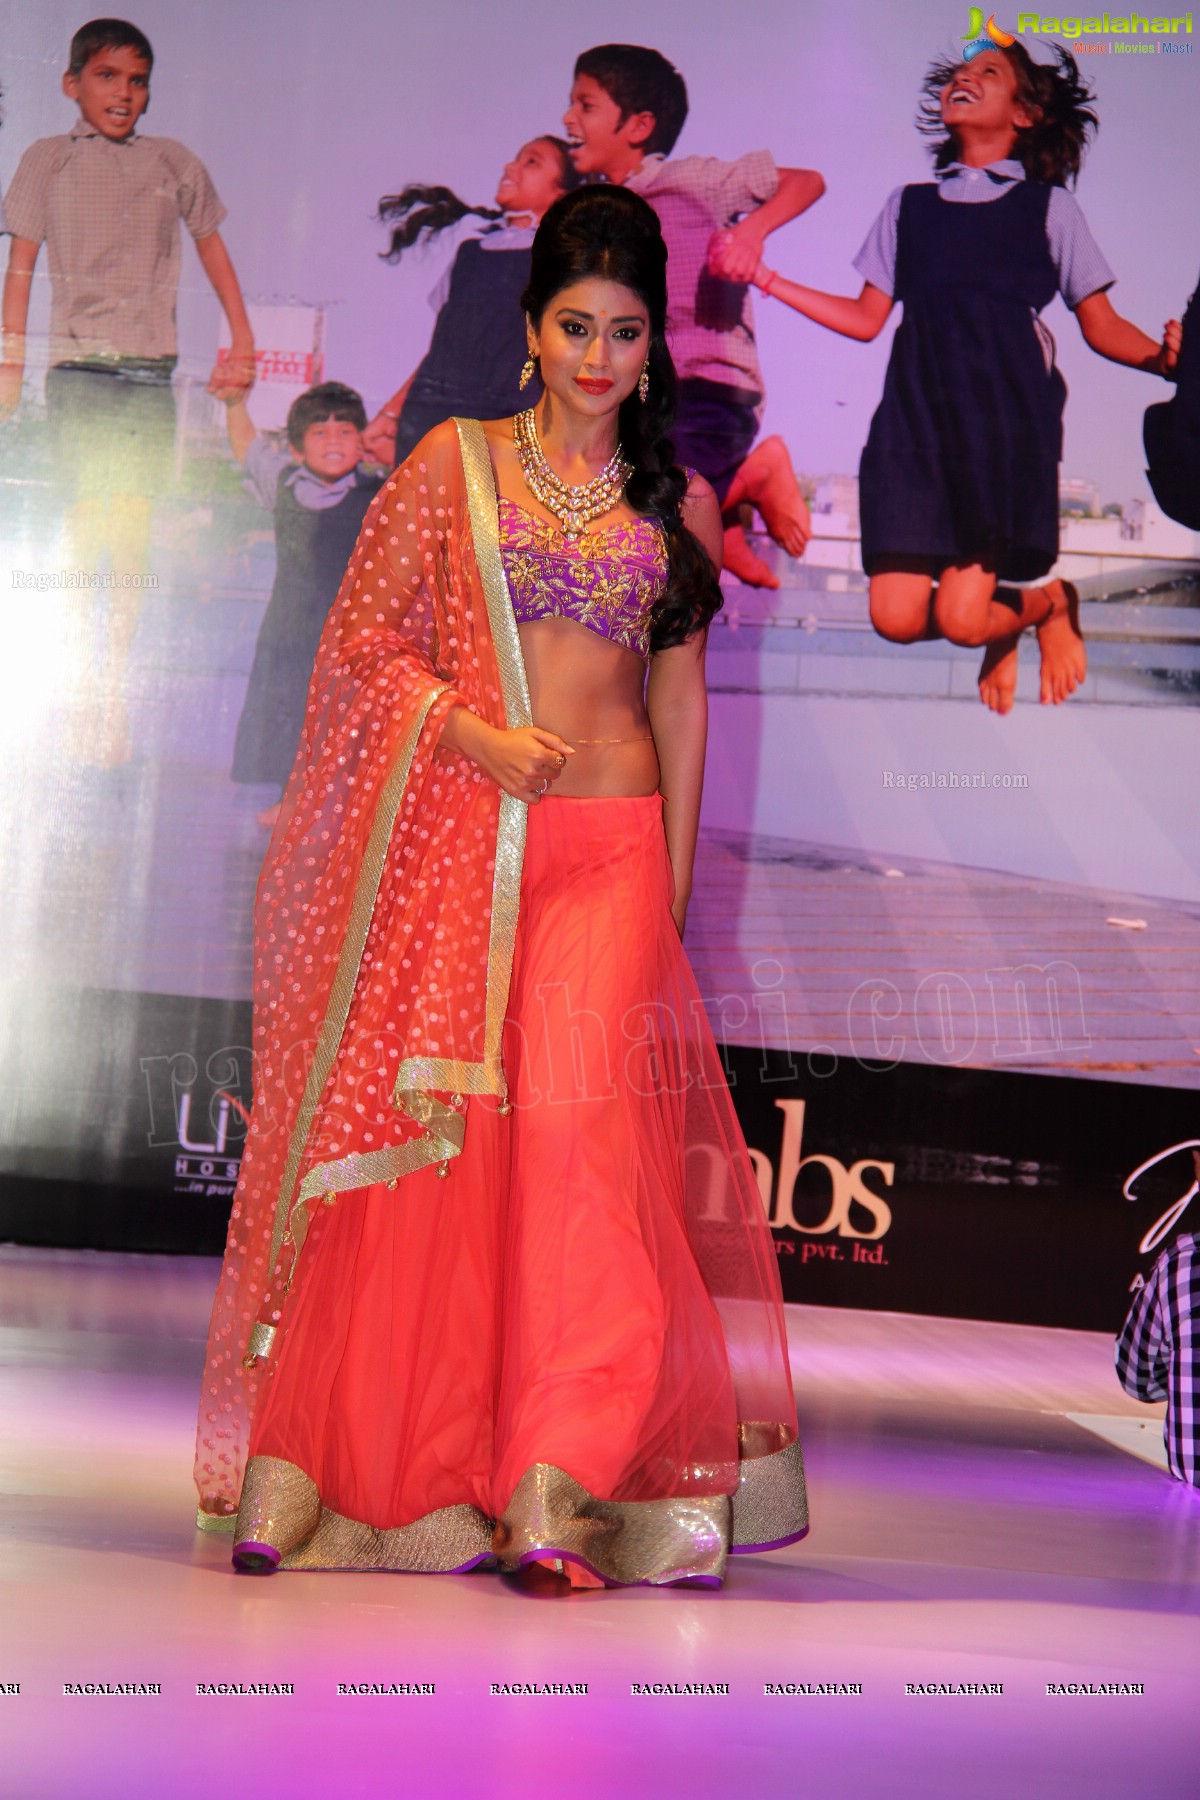 Youth NGO Passionate Foundation Charity Show